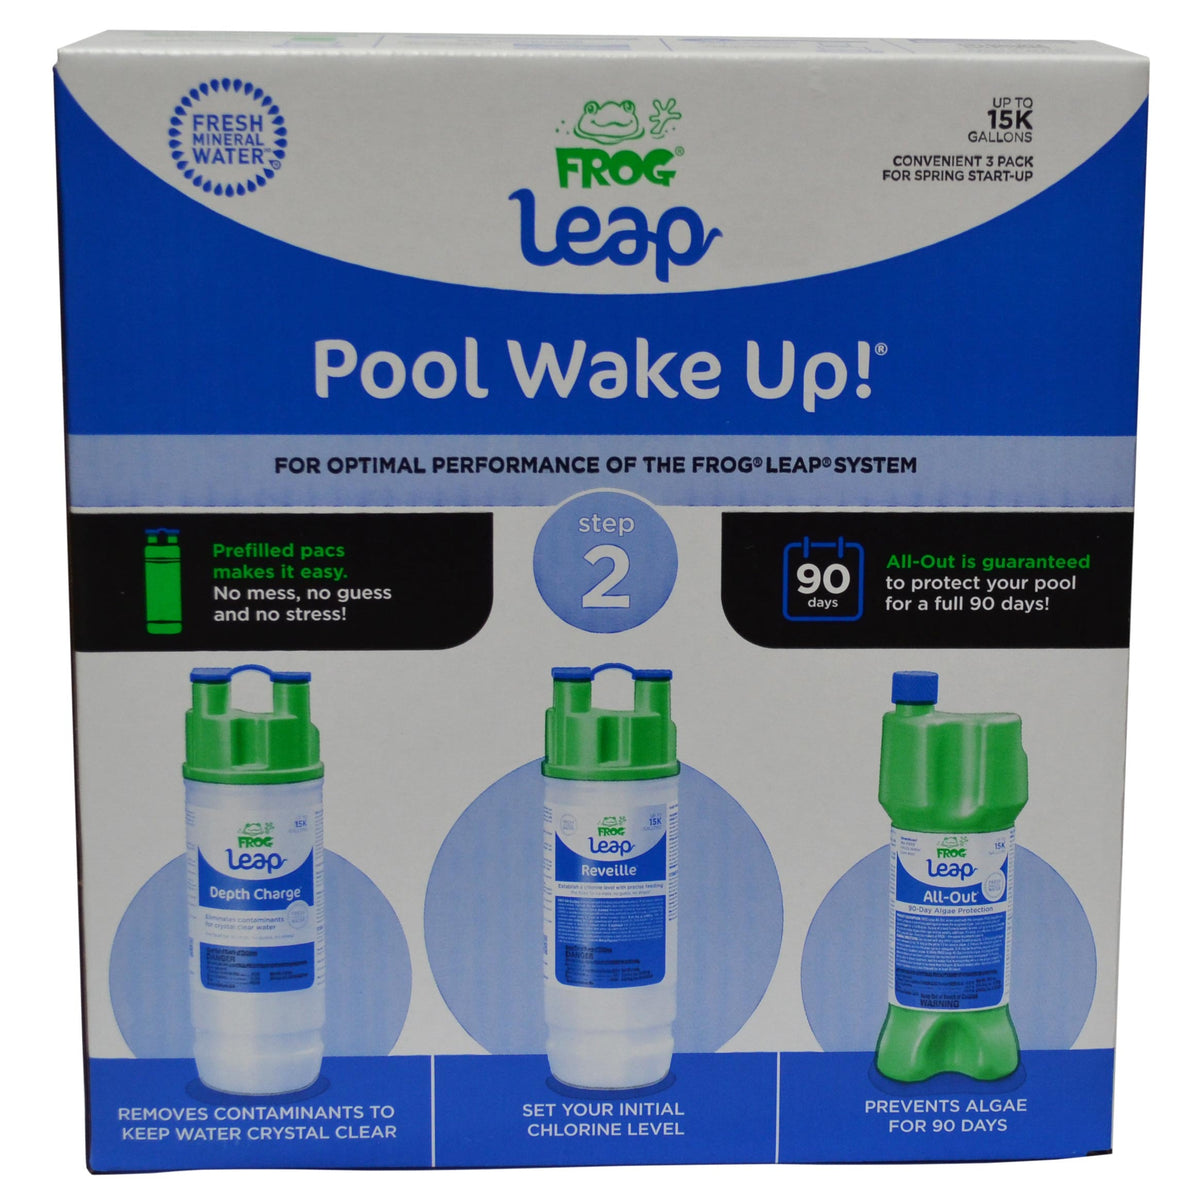 FROG Leap Pool Wake-Up/Hibernation All-in-One Kit to Open and Close Your Pool